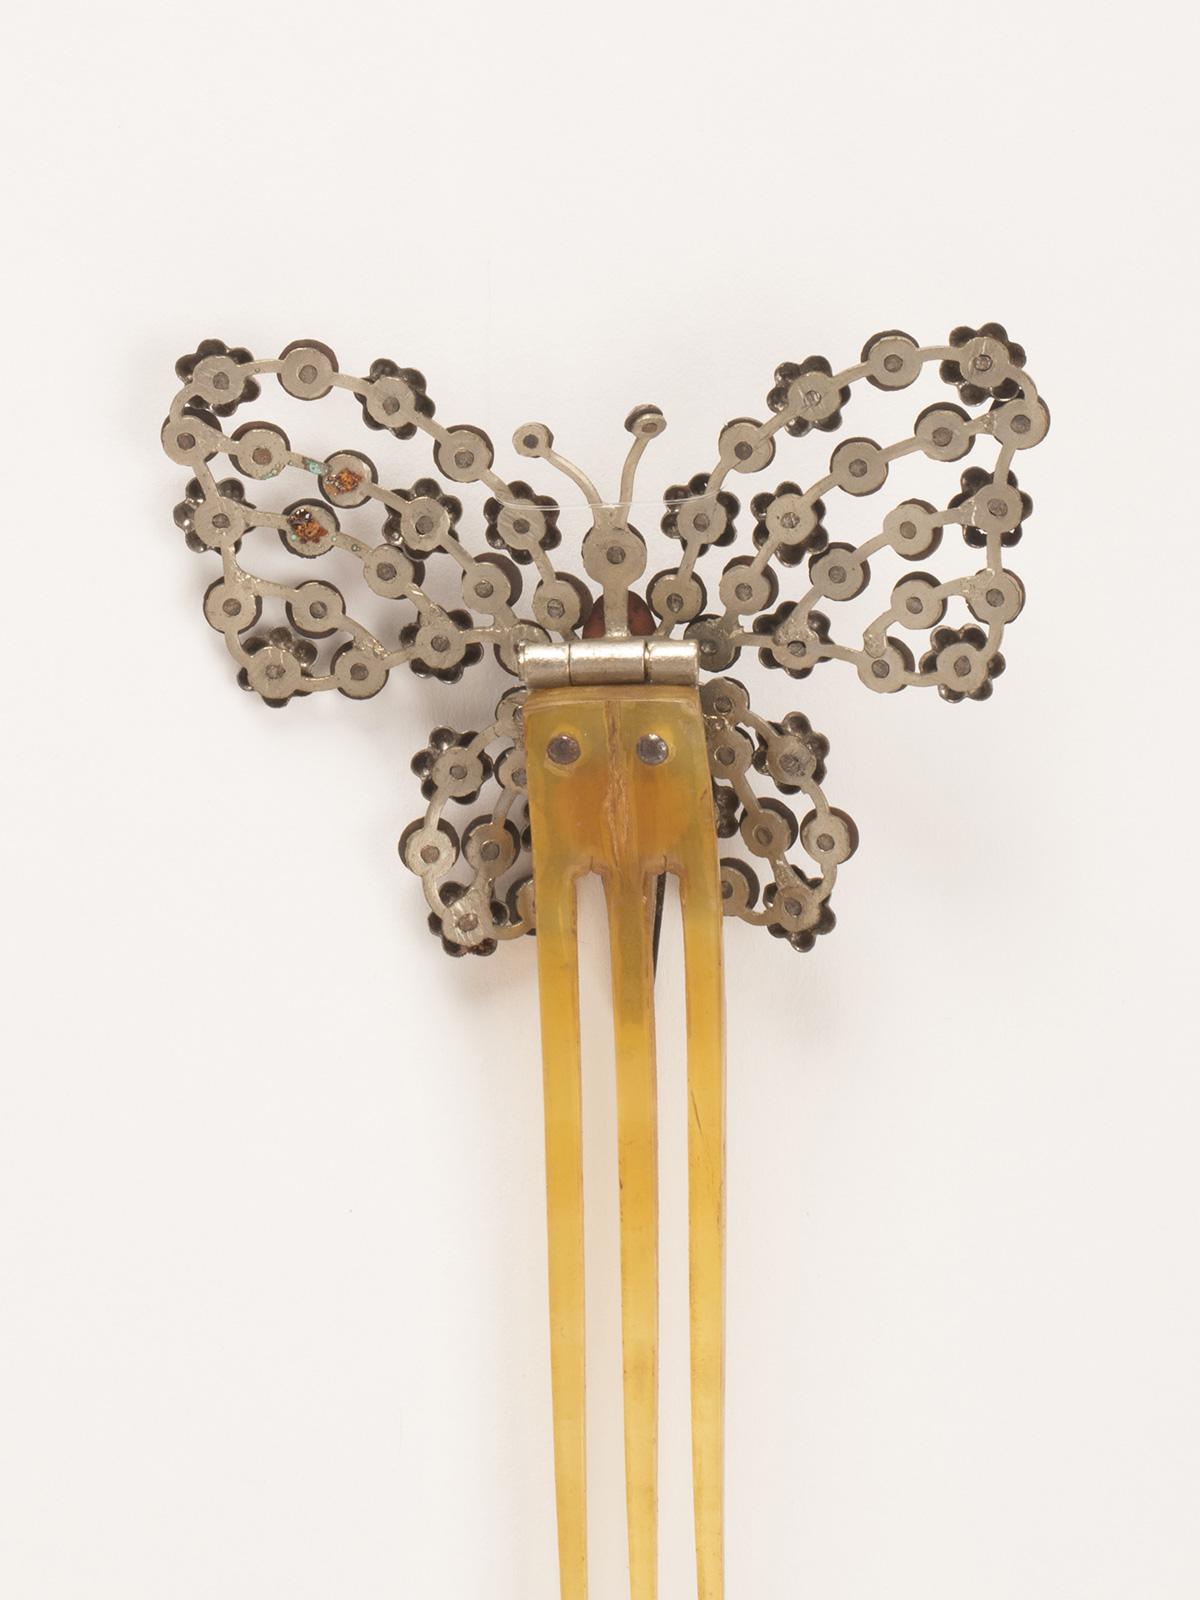 Tortoise Shell Turtleshell hair comb with butterfly in cutnsteel, France 1900.  For Sale